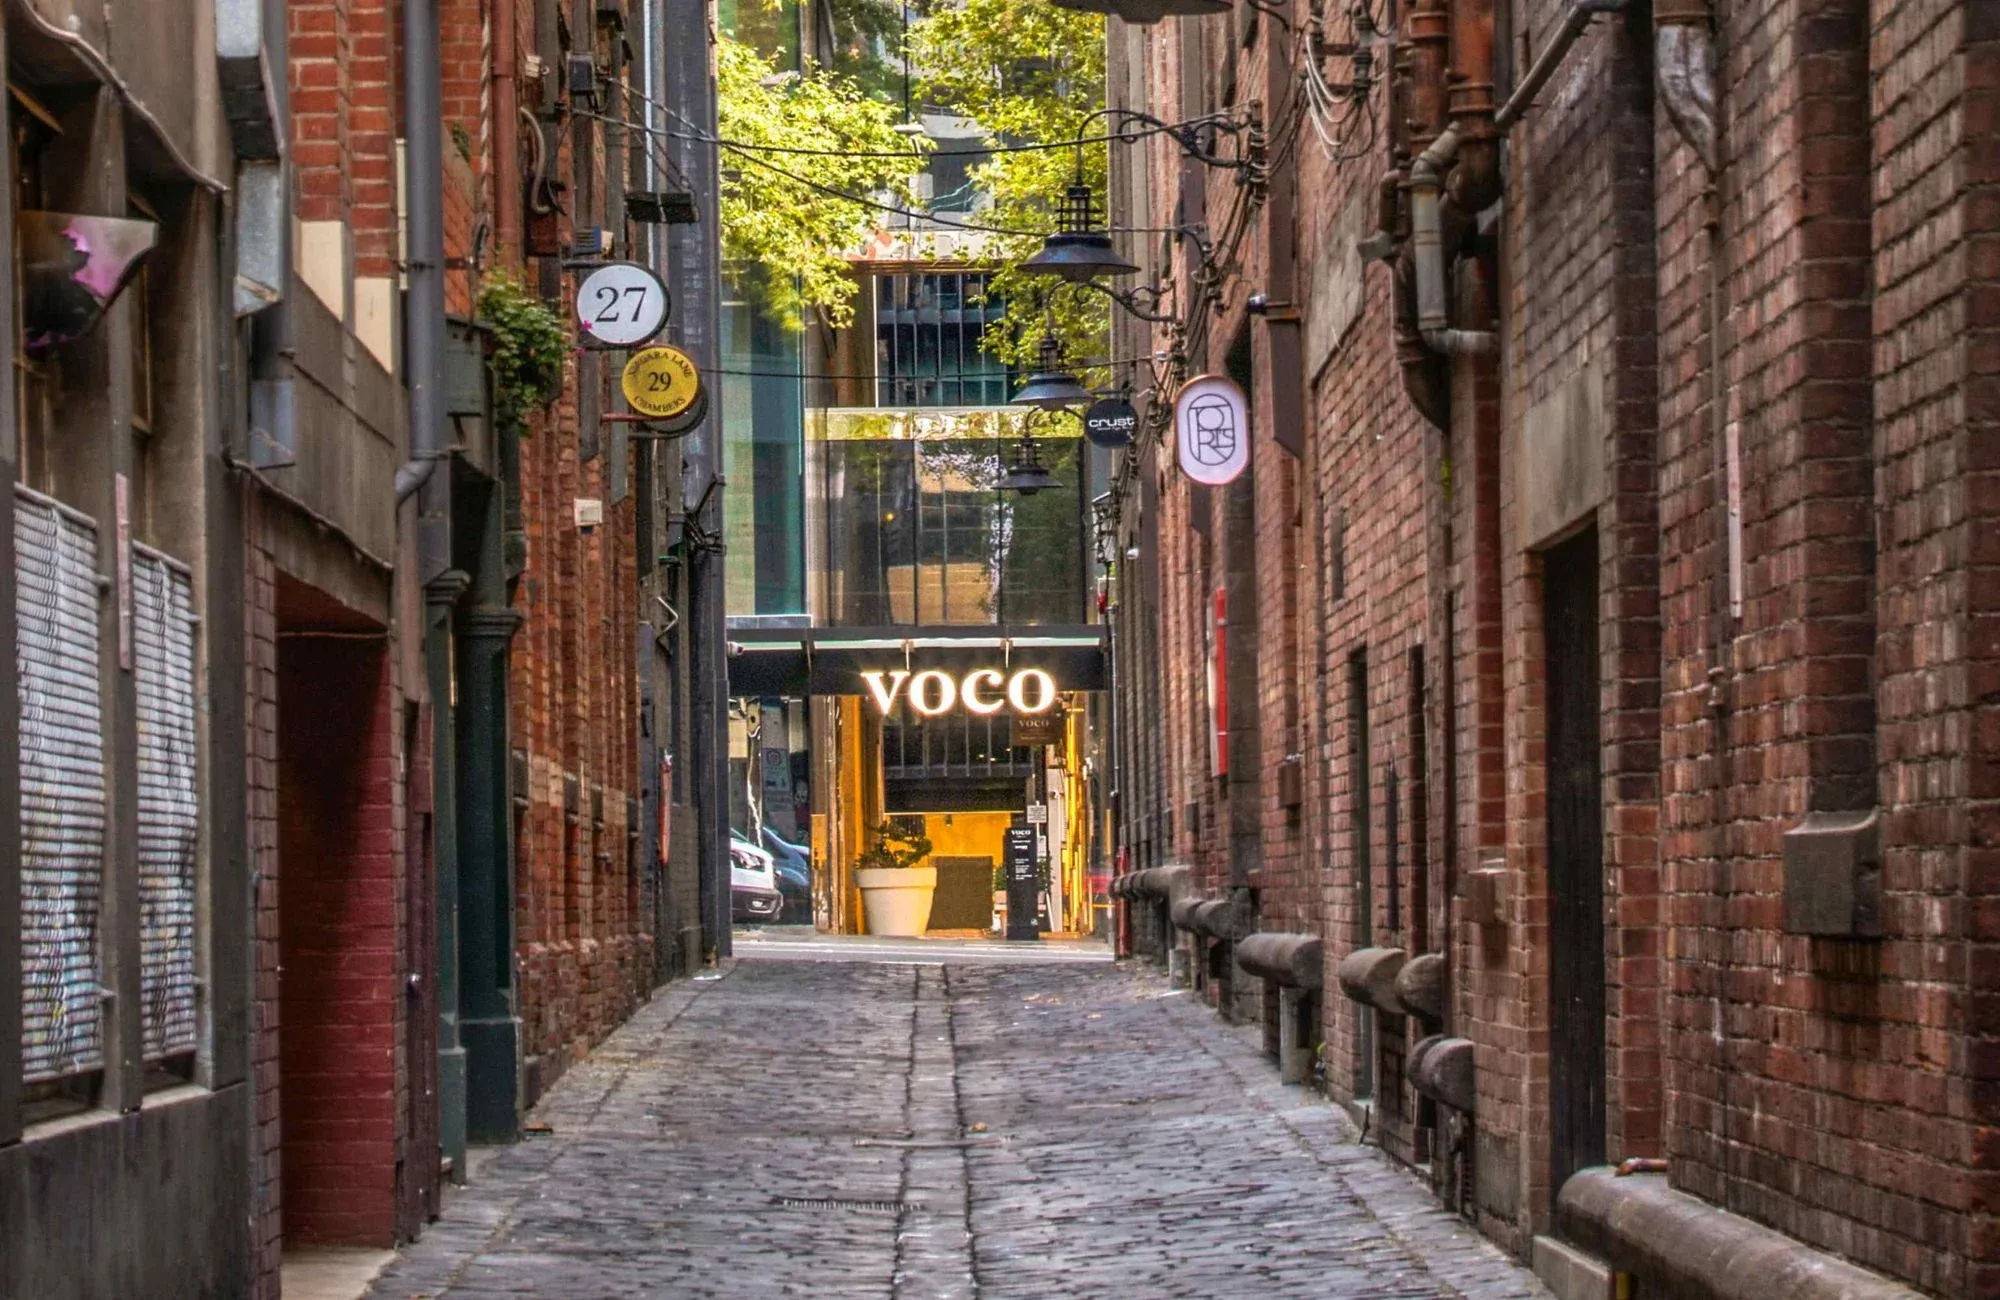 Voco Melbourne Central by IHG Hotels & Resorts. Laneway view, with an emphasis on Voco's logo and facade. 